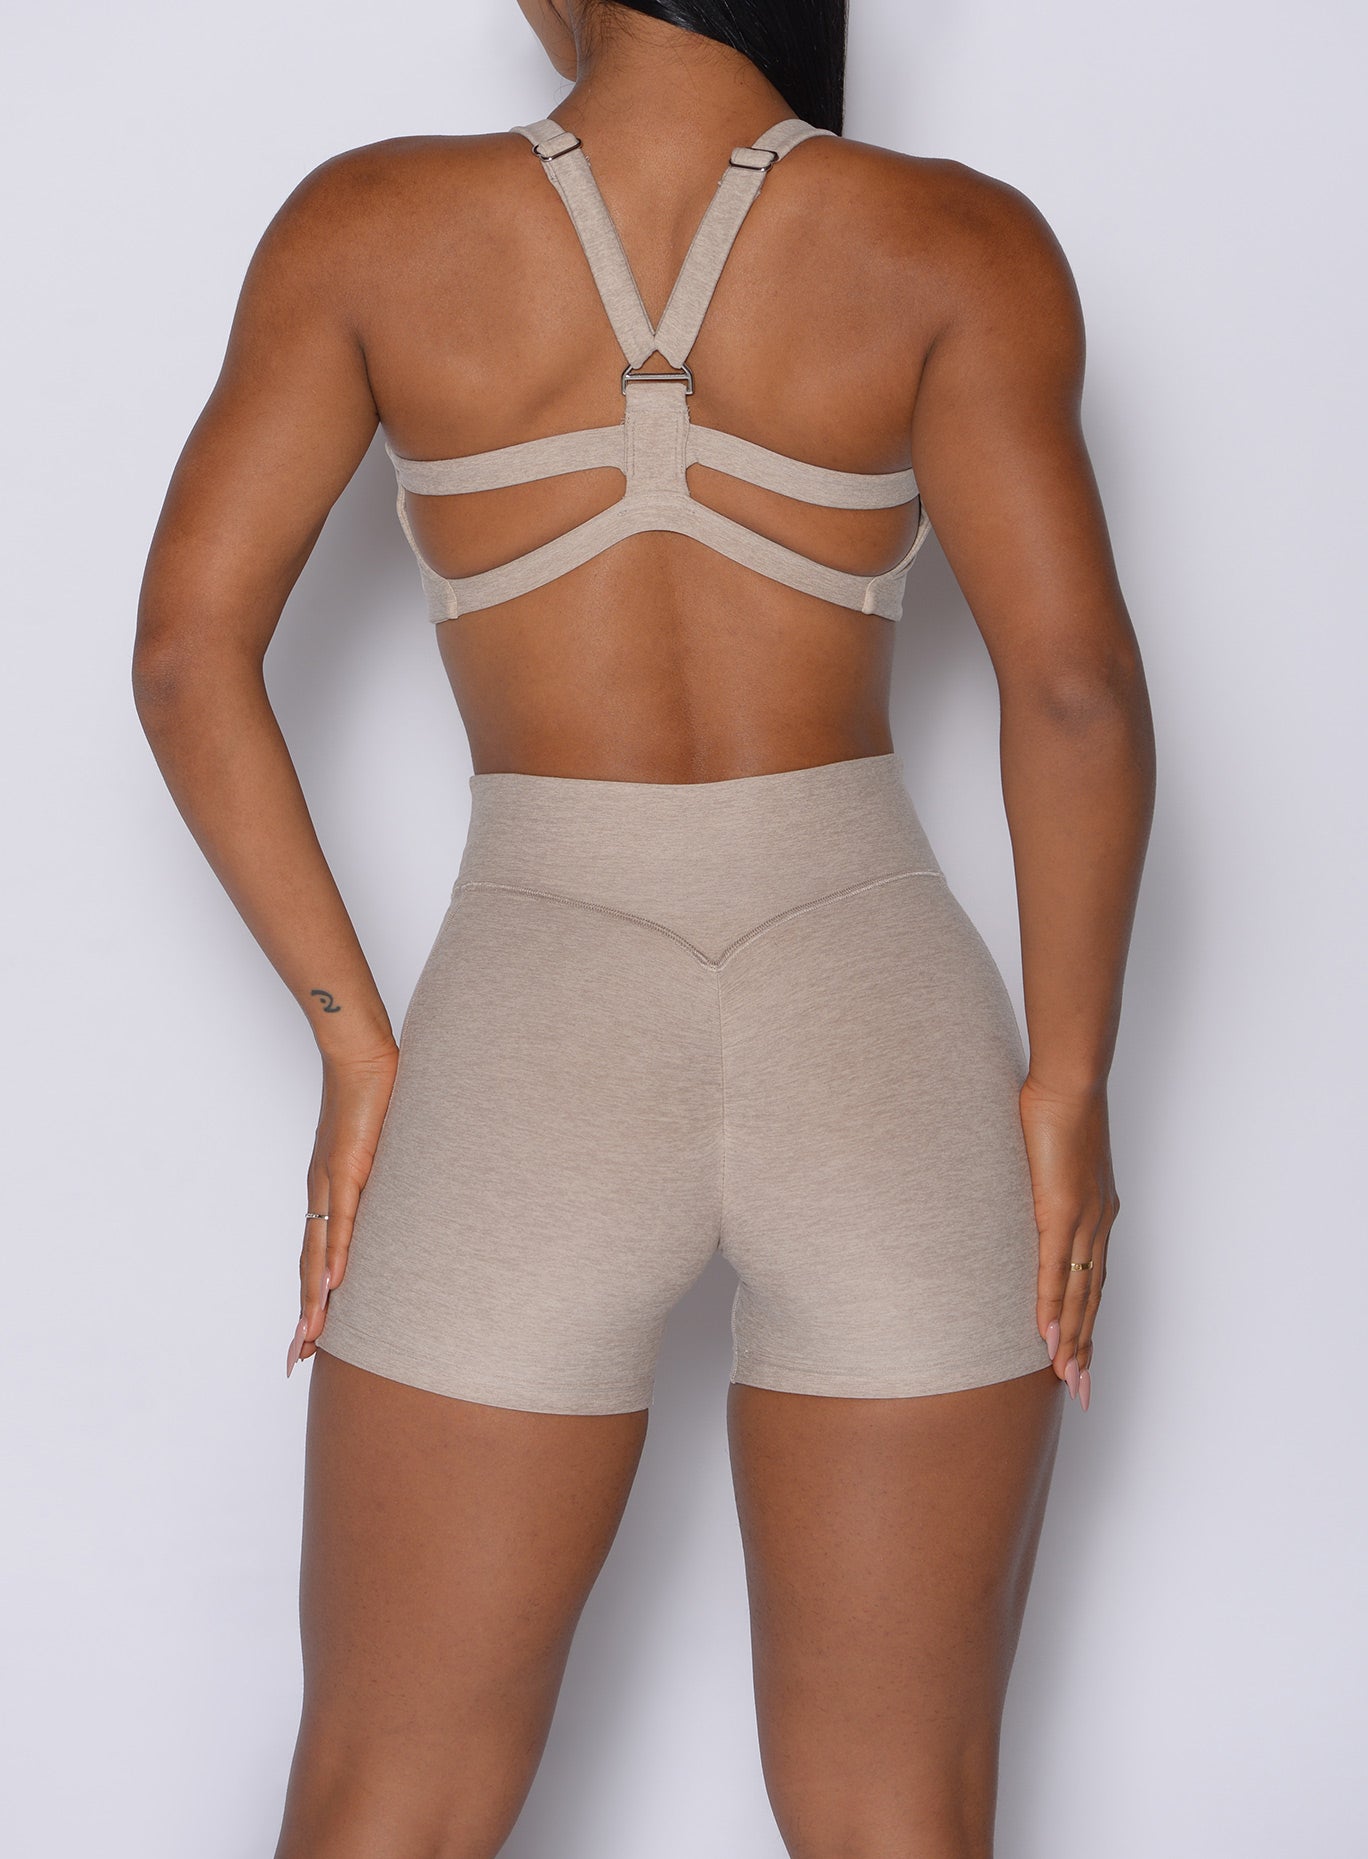 back profile view of a model wearing our core set bra in taupe color along with the matching shorts